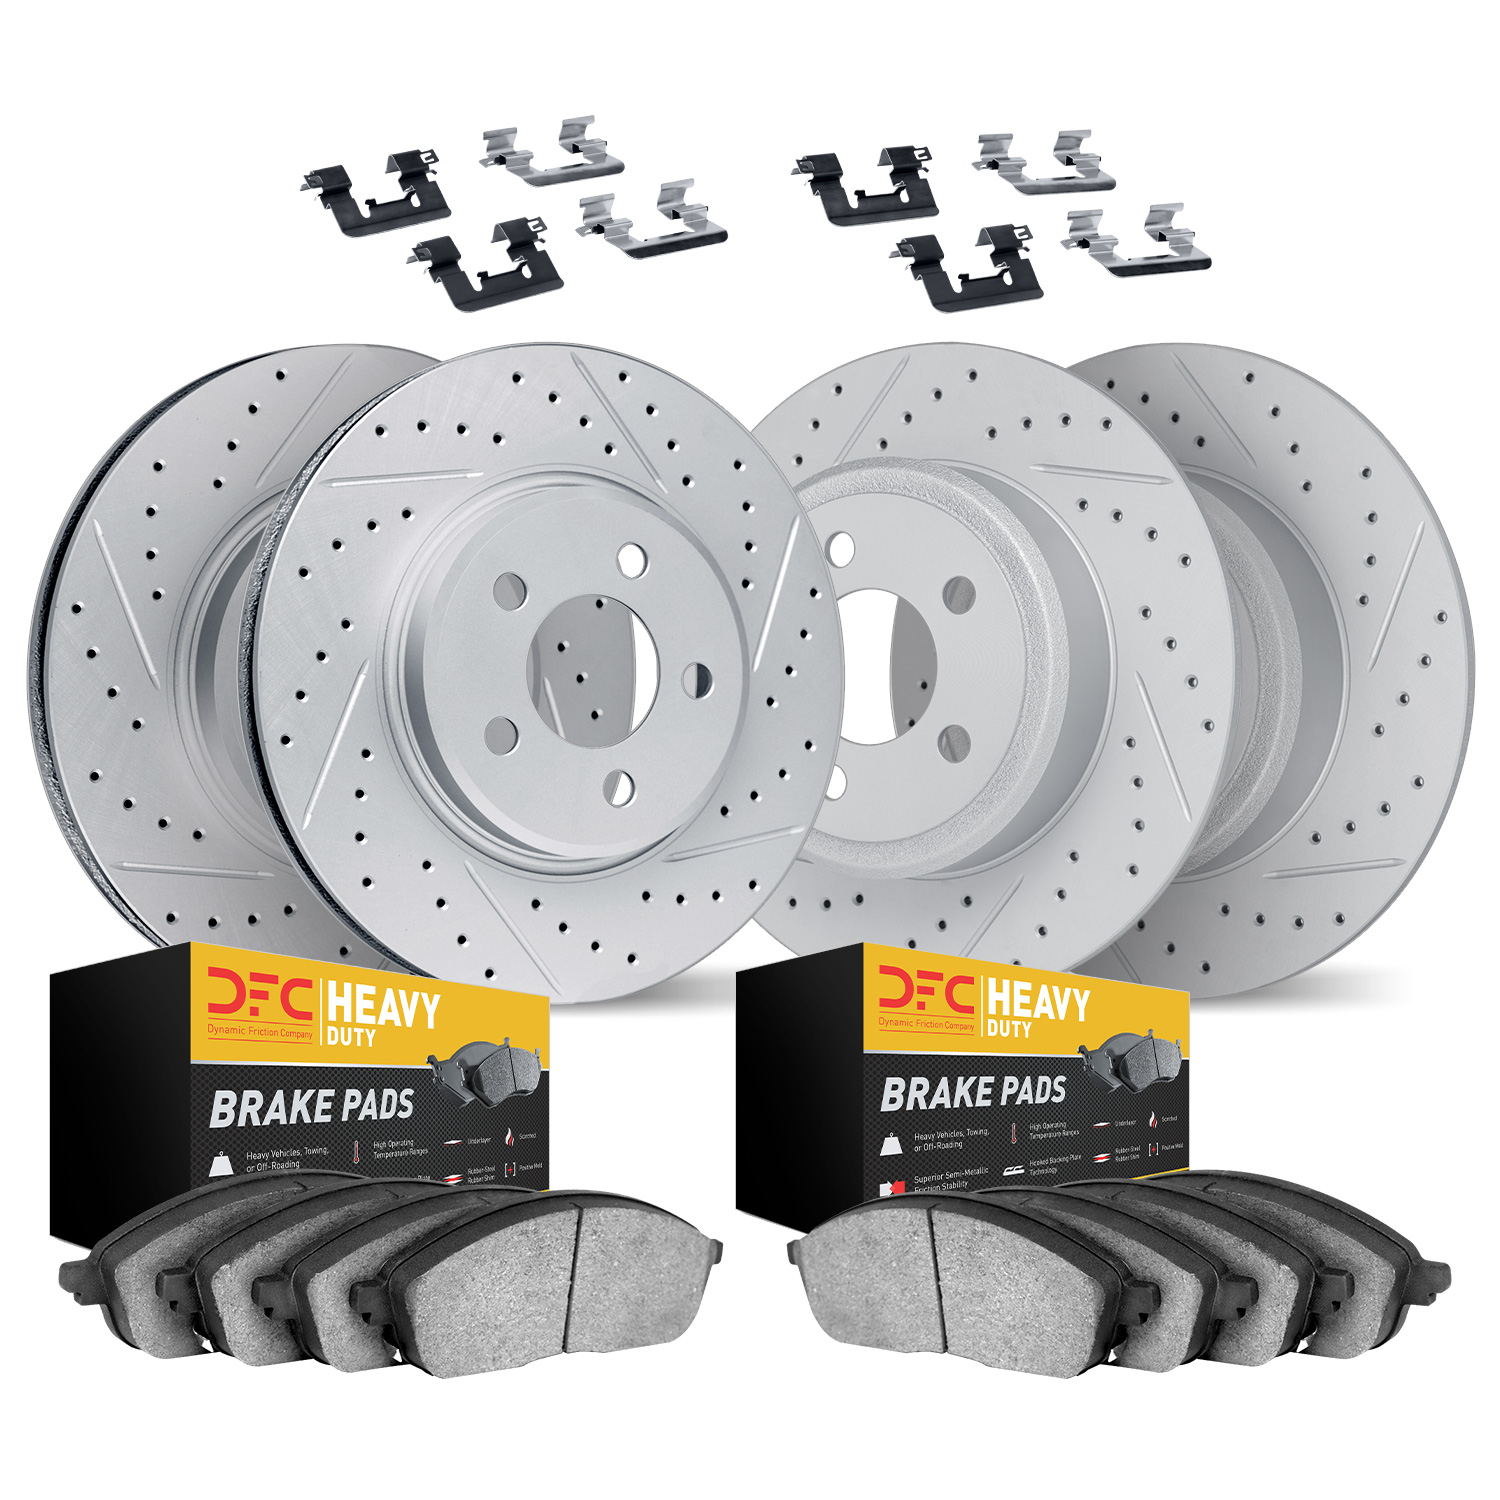 2214-99038 Geoperformance Drilled/Slotted Rotors w/Heavy-Duty Pads Kit & Hardware, 1995-2001 Ford/Lincoln/Mercury/Mazda, Positio